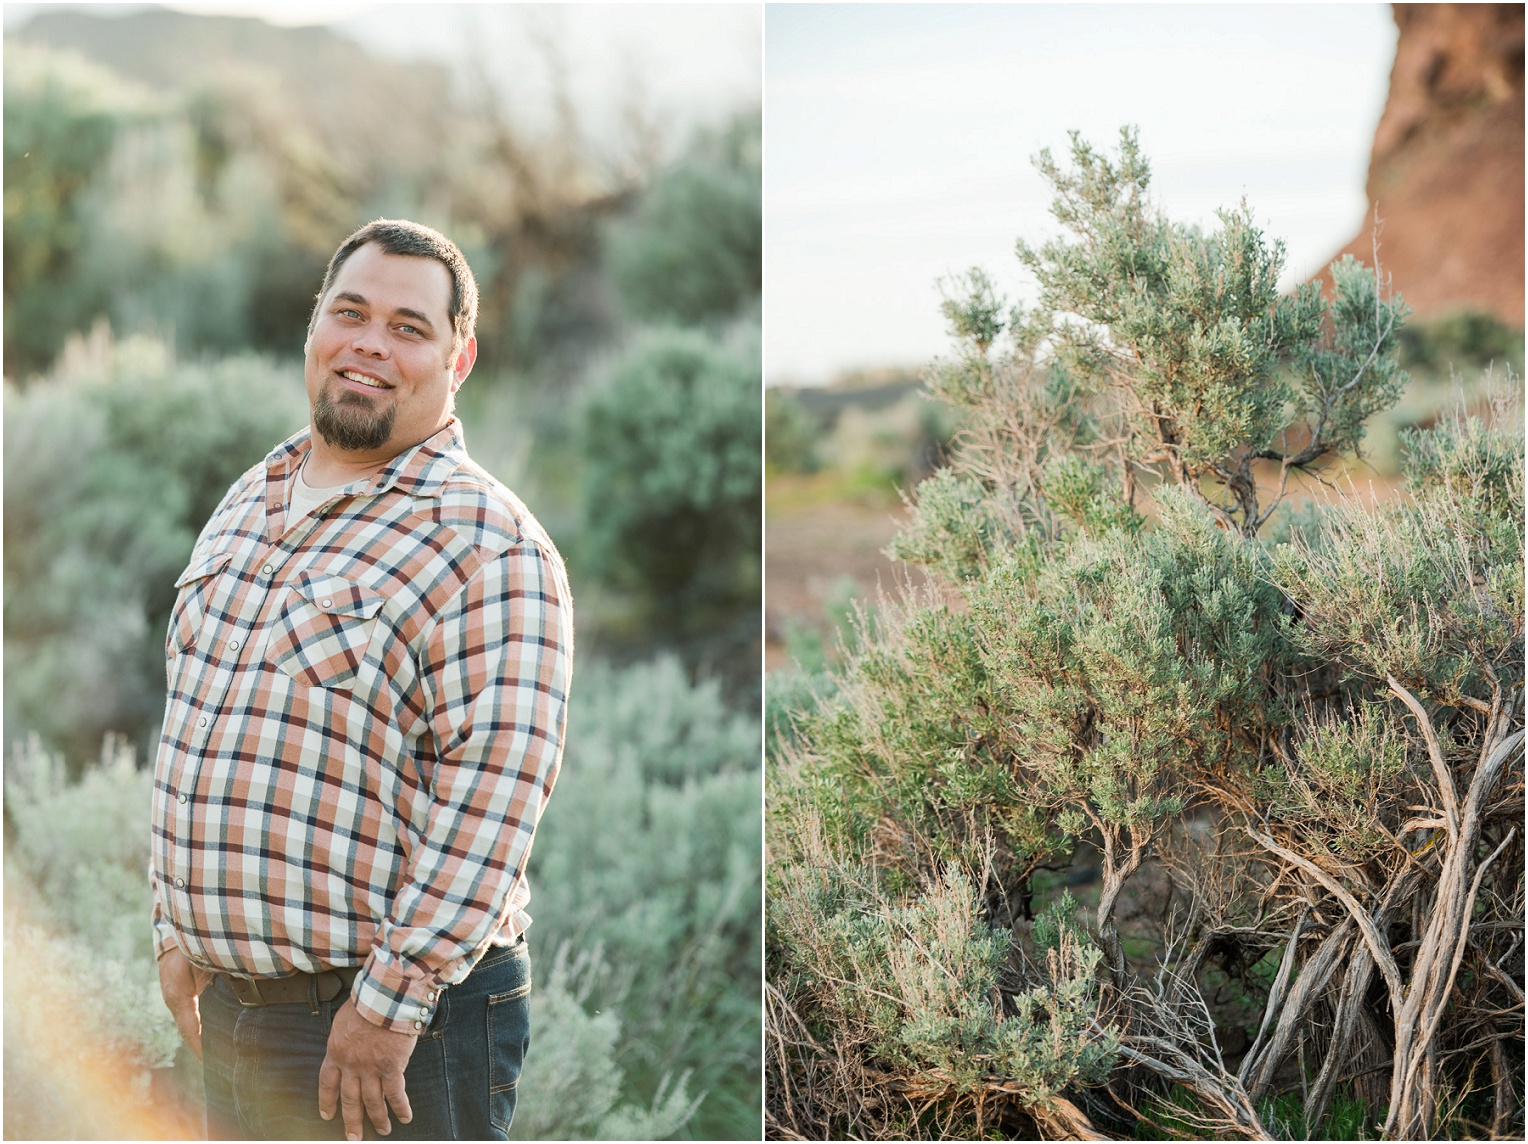 Vantage Crags Engagement Session Couple standing in sagebrush field